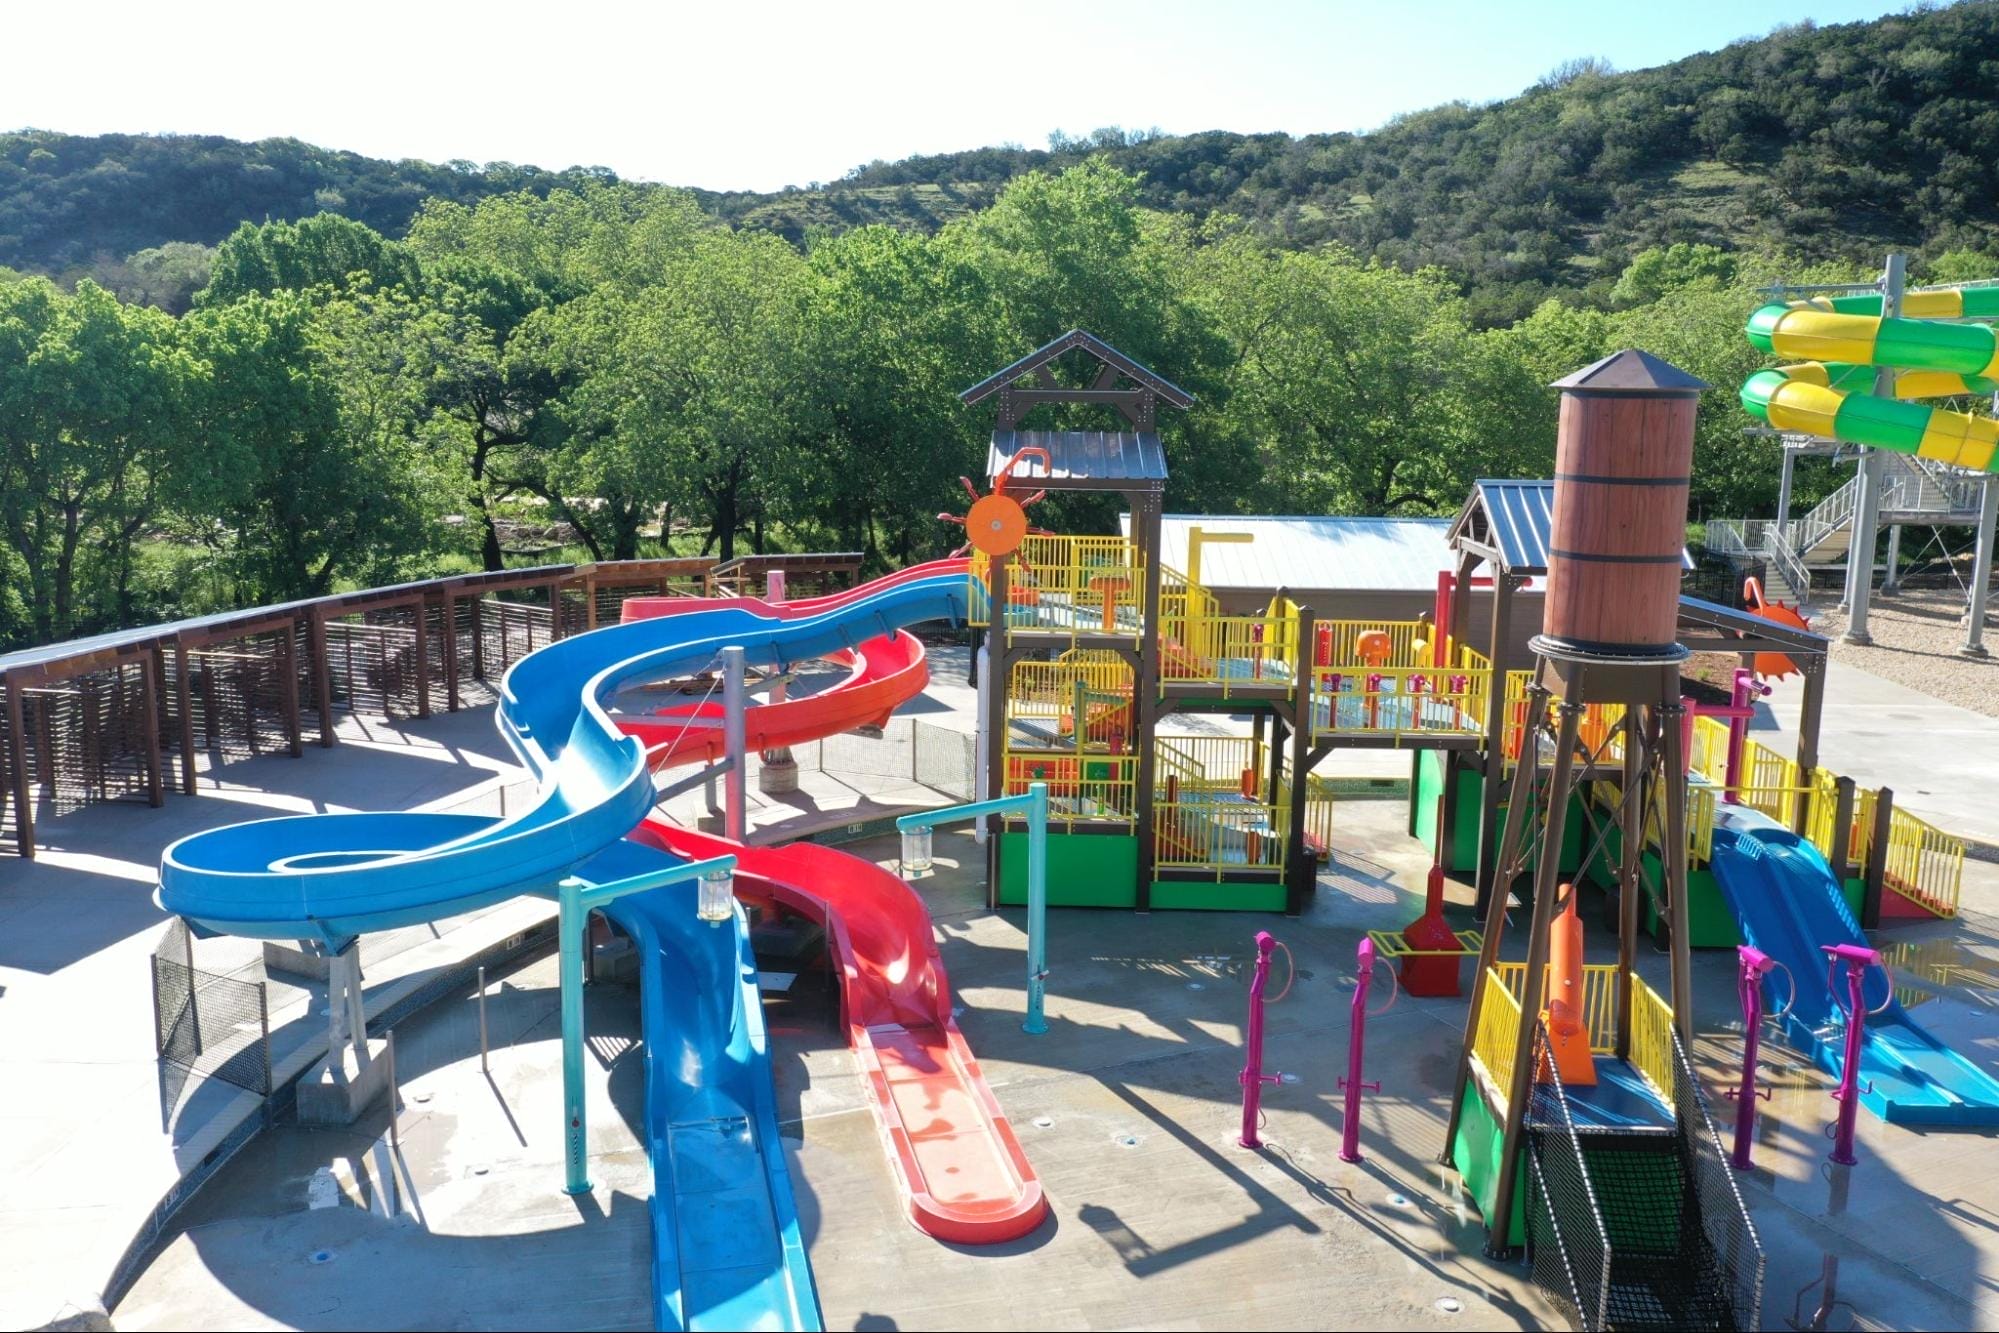 A photo of the water park installation by Interactive Play in New Braunfels, Texas, prior to the park opening.